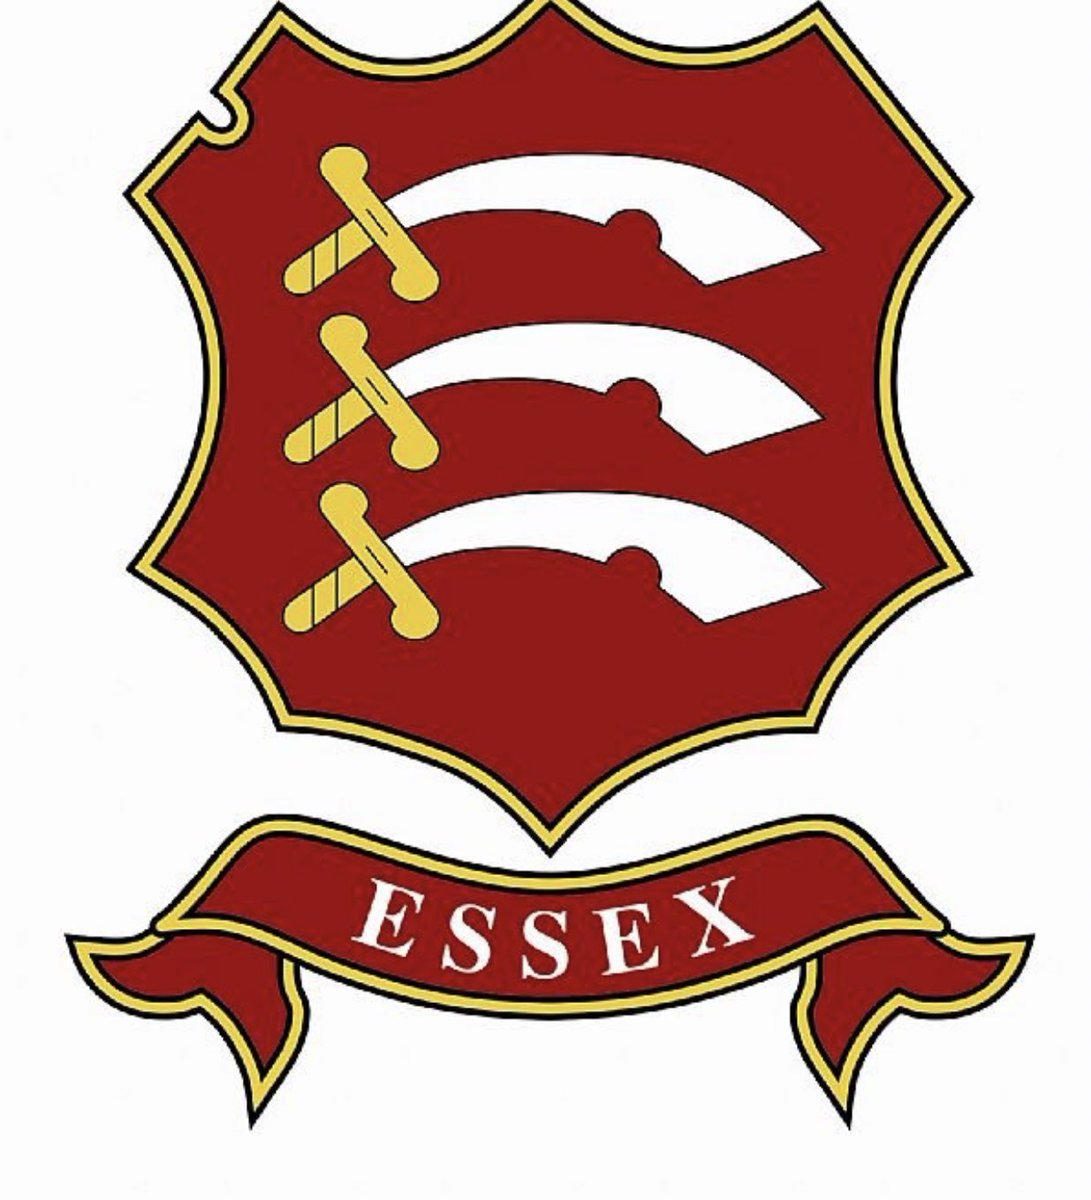 Good luck Barking CC at their first ever super league game tomorrow! Excited to see you play! #ShepherdNeameEssexLeague